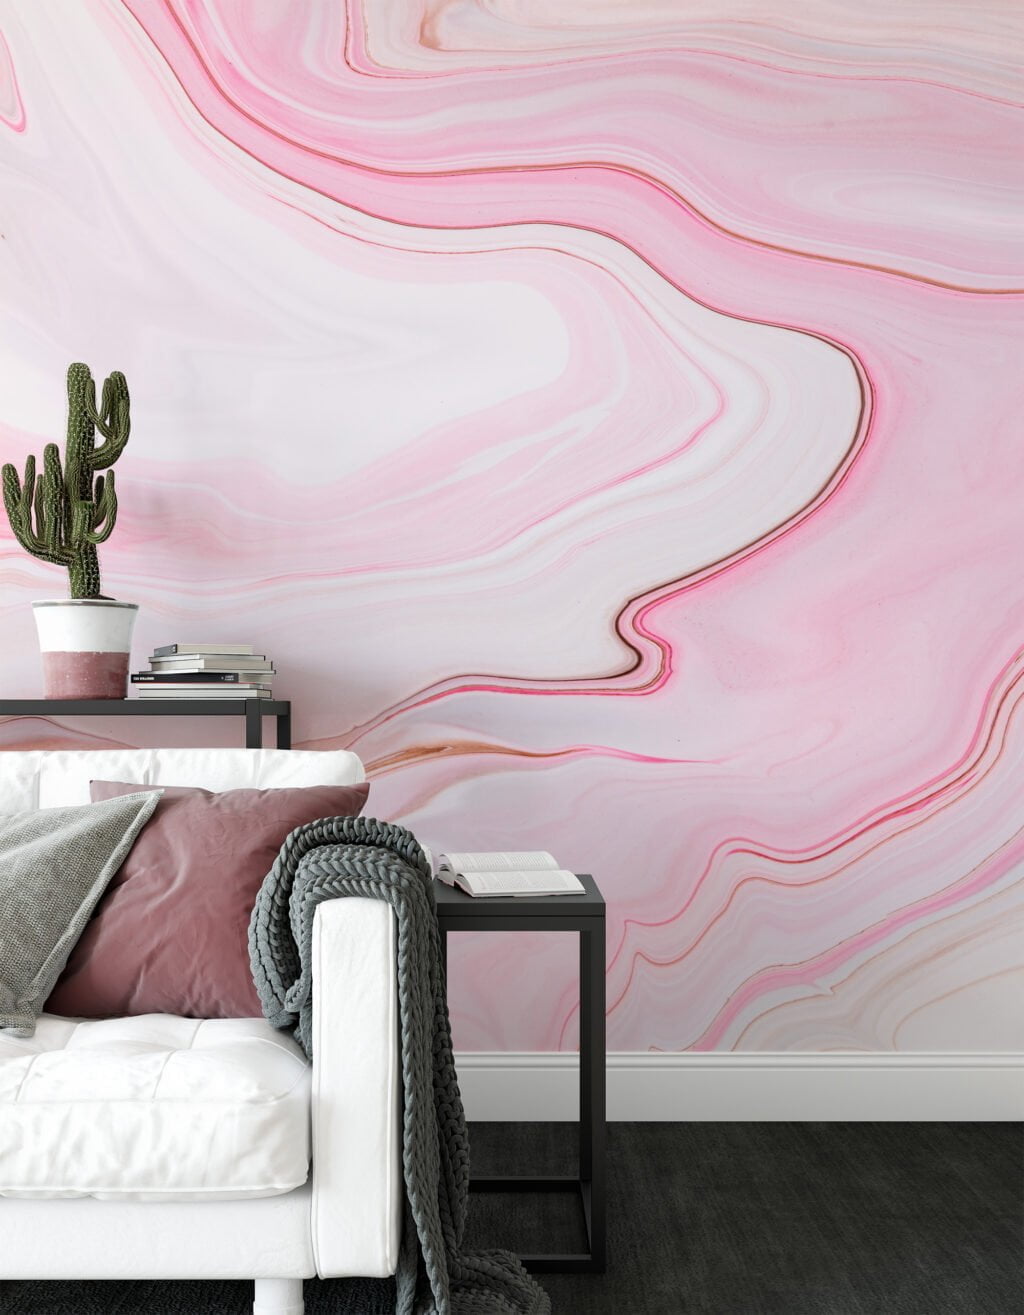 Pink Fluid Art Wall Mural - Peel and Stick, Easy to Apply and Perfect for Bedroom Walls